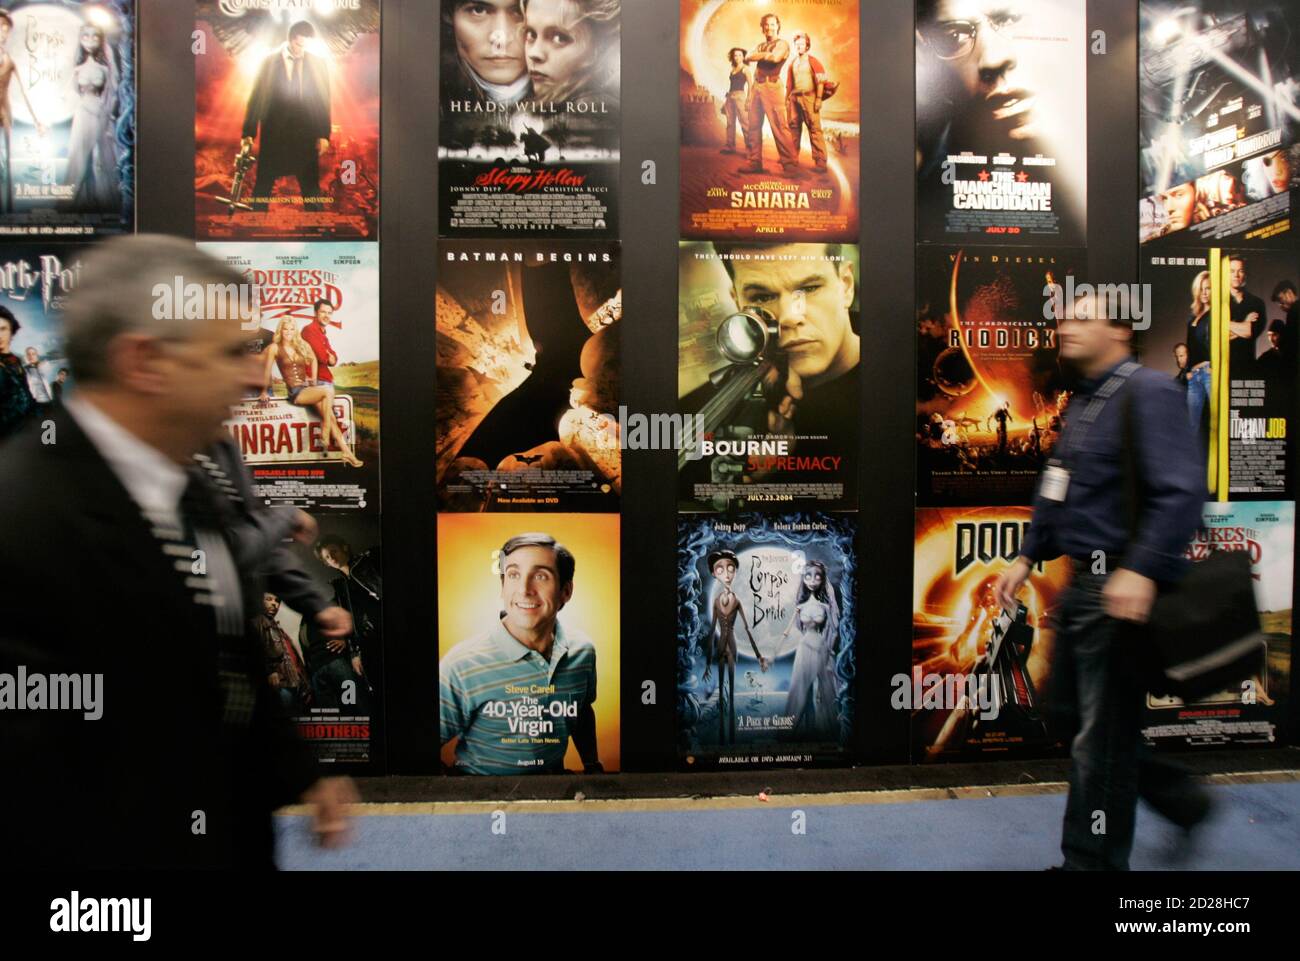 People walk by movie posters showing films available on the HD DVD format at the 2006 Consumer Electronics Show in Las Vegas January 6, 2006. The show is expected to attract 130,000 industry professionals. REUTERS/Rick Wilking Stock Photo